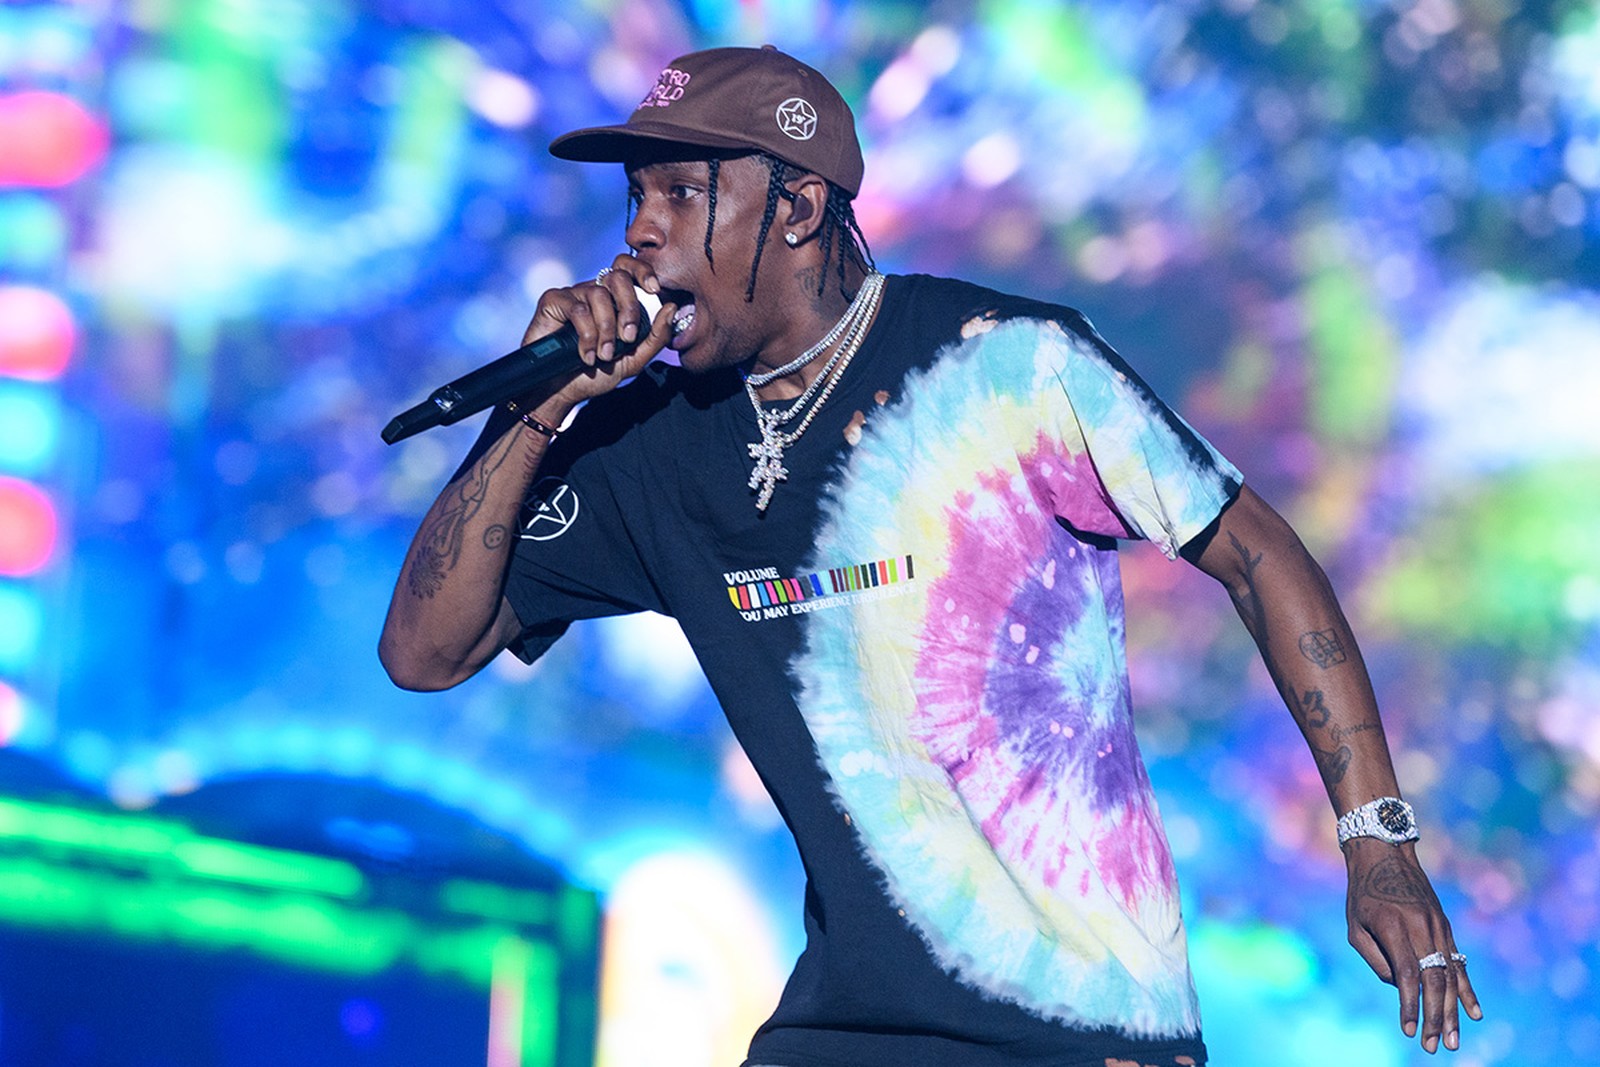 Eight killed, 300 injured after crowd surge at Travis Scott’s Texas festival